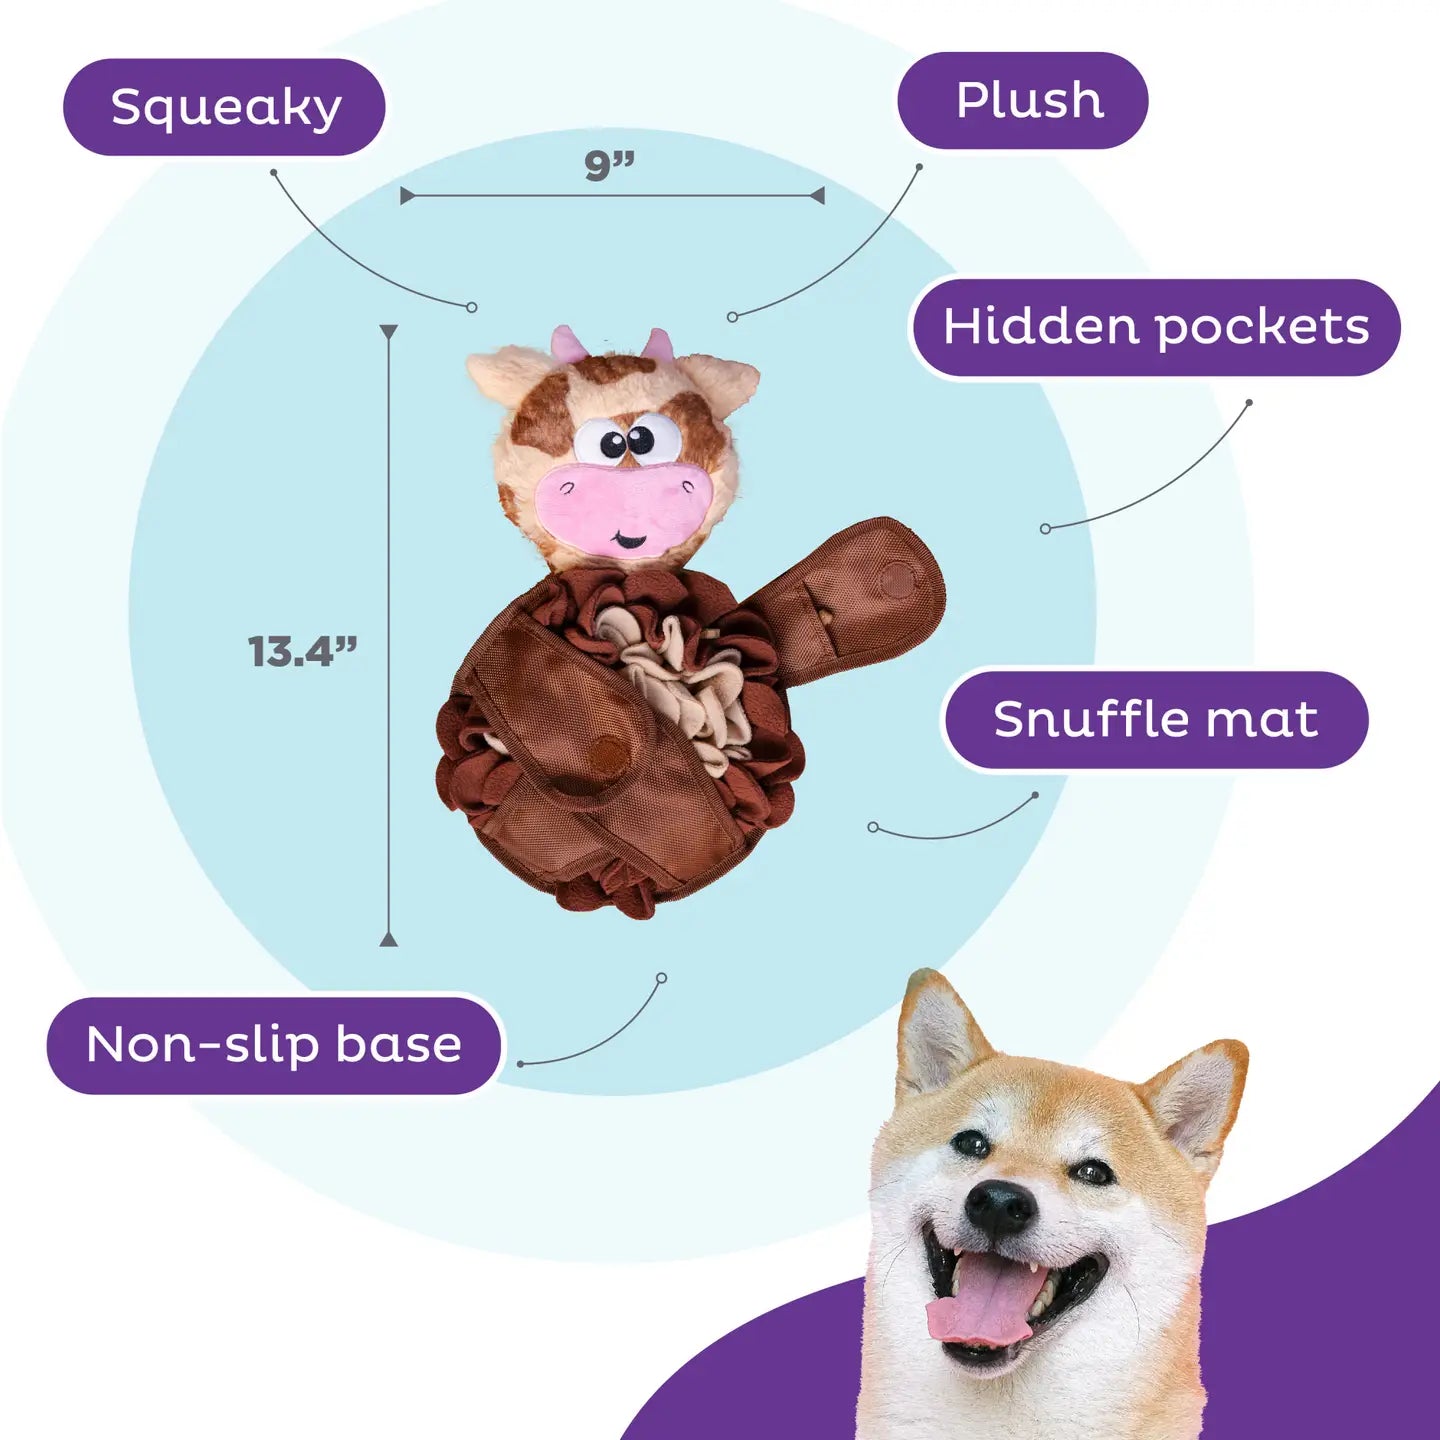 Snuffle Palz Cow Dog Toy is Non-slip base, Squeaky, Plush, Has hidden pockets and is a snuffle mat!